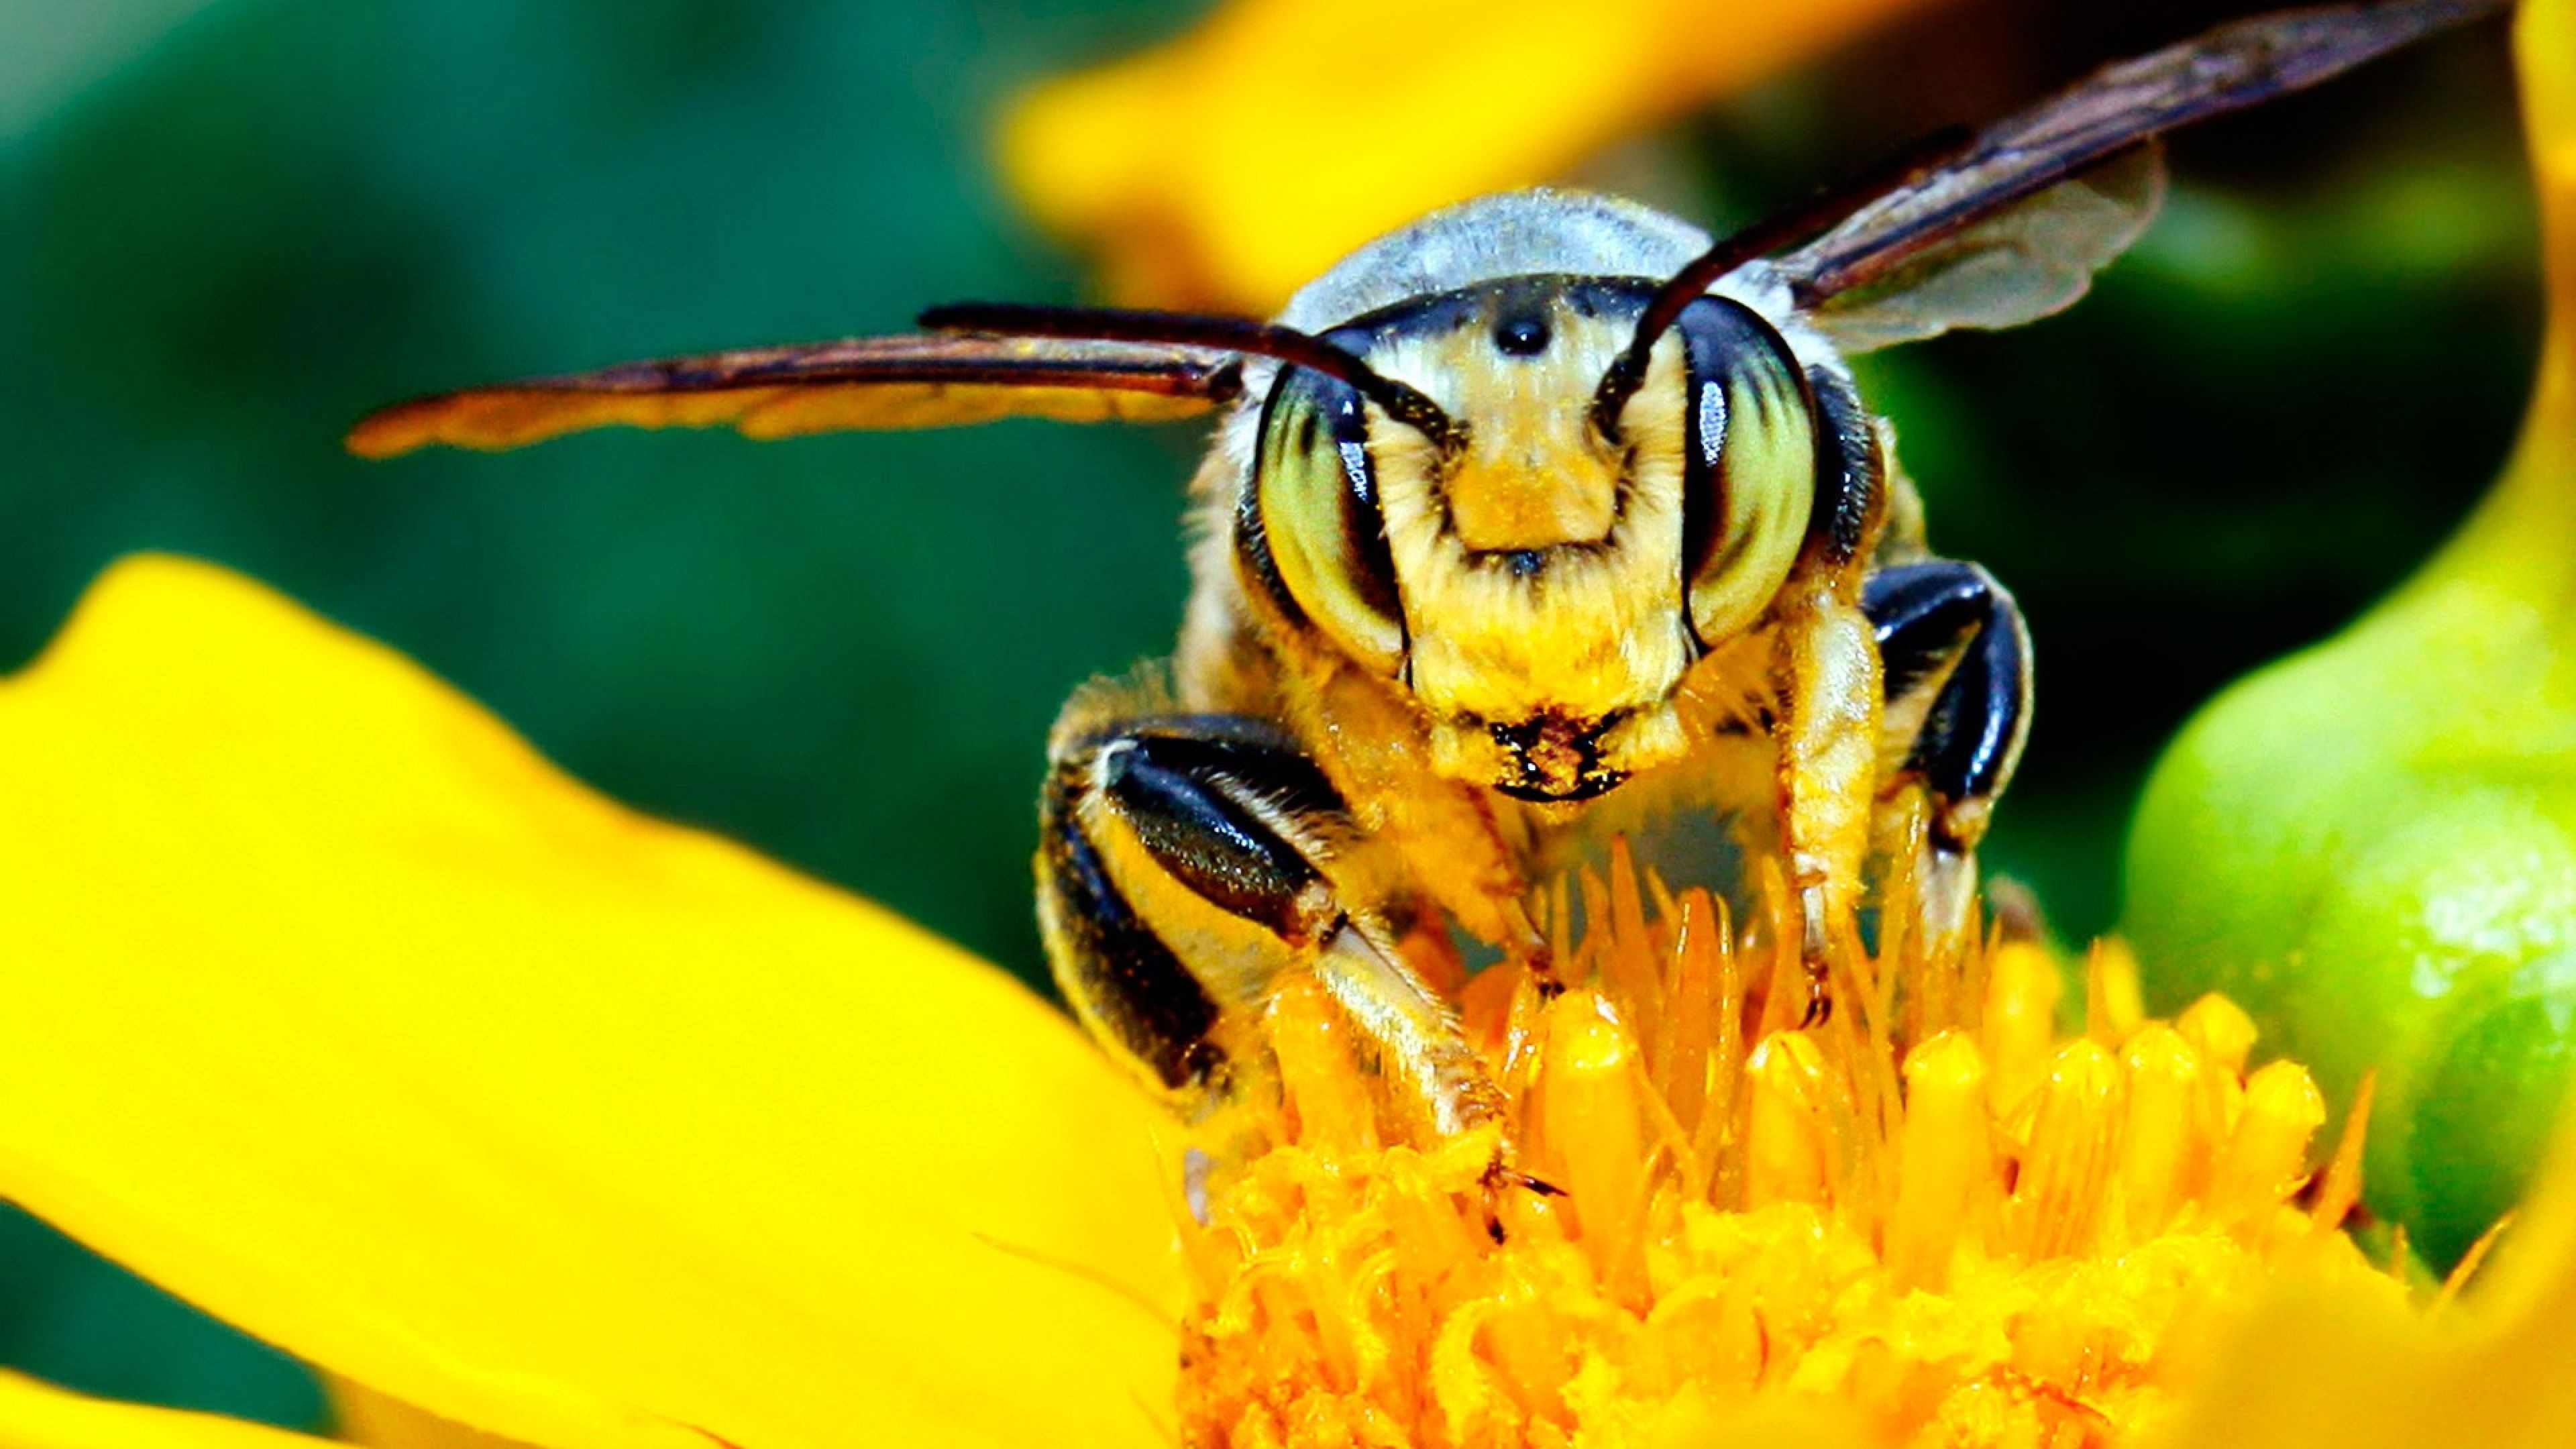 Bee: An insect with a yellow-and-black striped body that makes a buzzing noise as it flies. 3840x2160 4K Background.